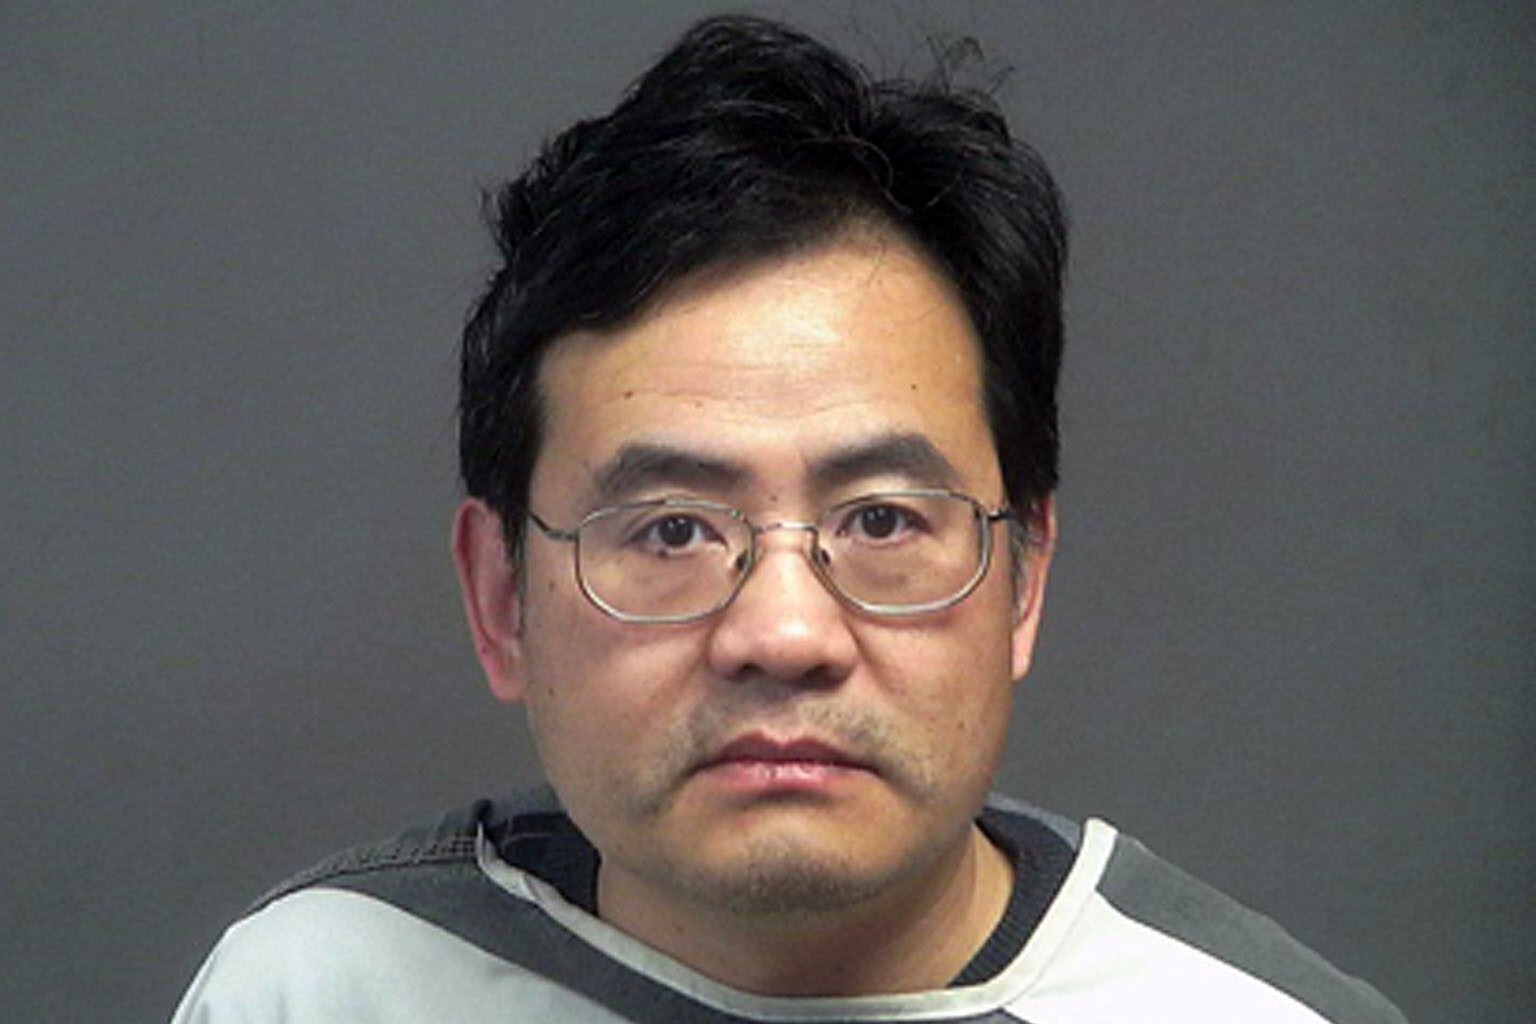 Former University of Tennessee associate professor Hu Anming has been accused of wire fraud and lying to Nasa about his ties to Beijing University of Technology. Photo: Blount County Sheriff’s Office